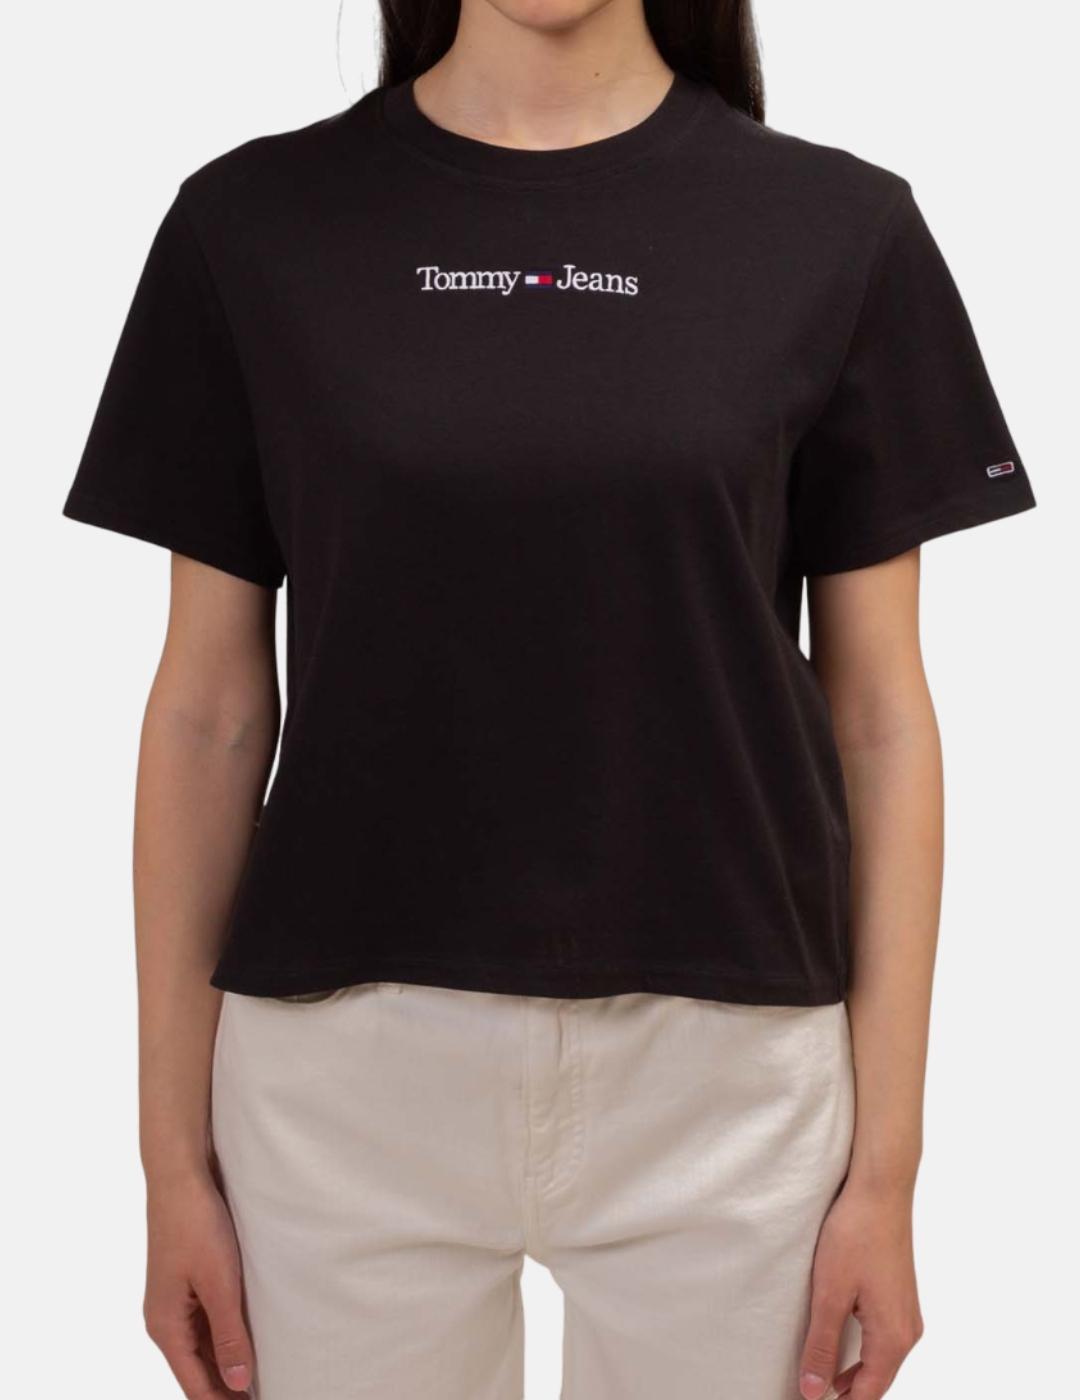 Camiseta Tommy Jeans para Chica